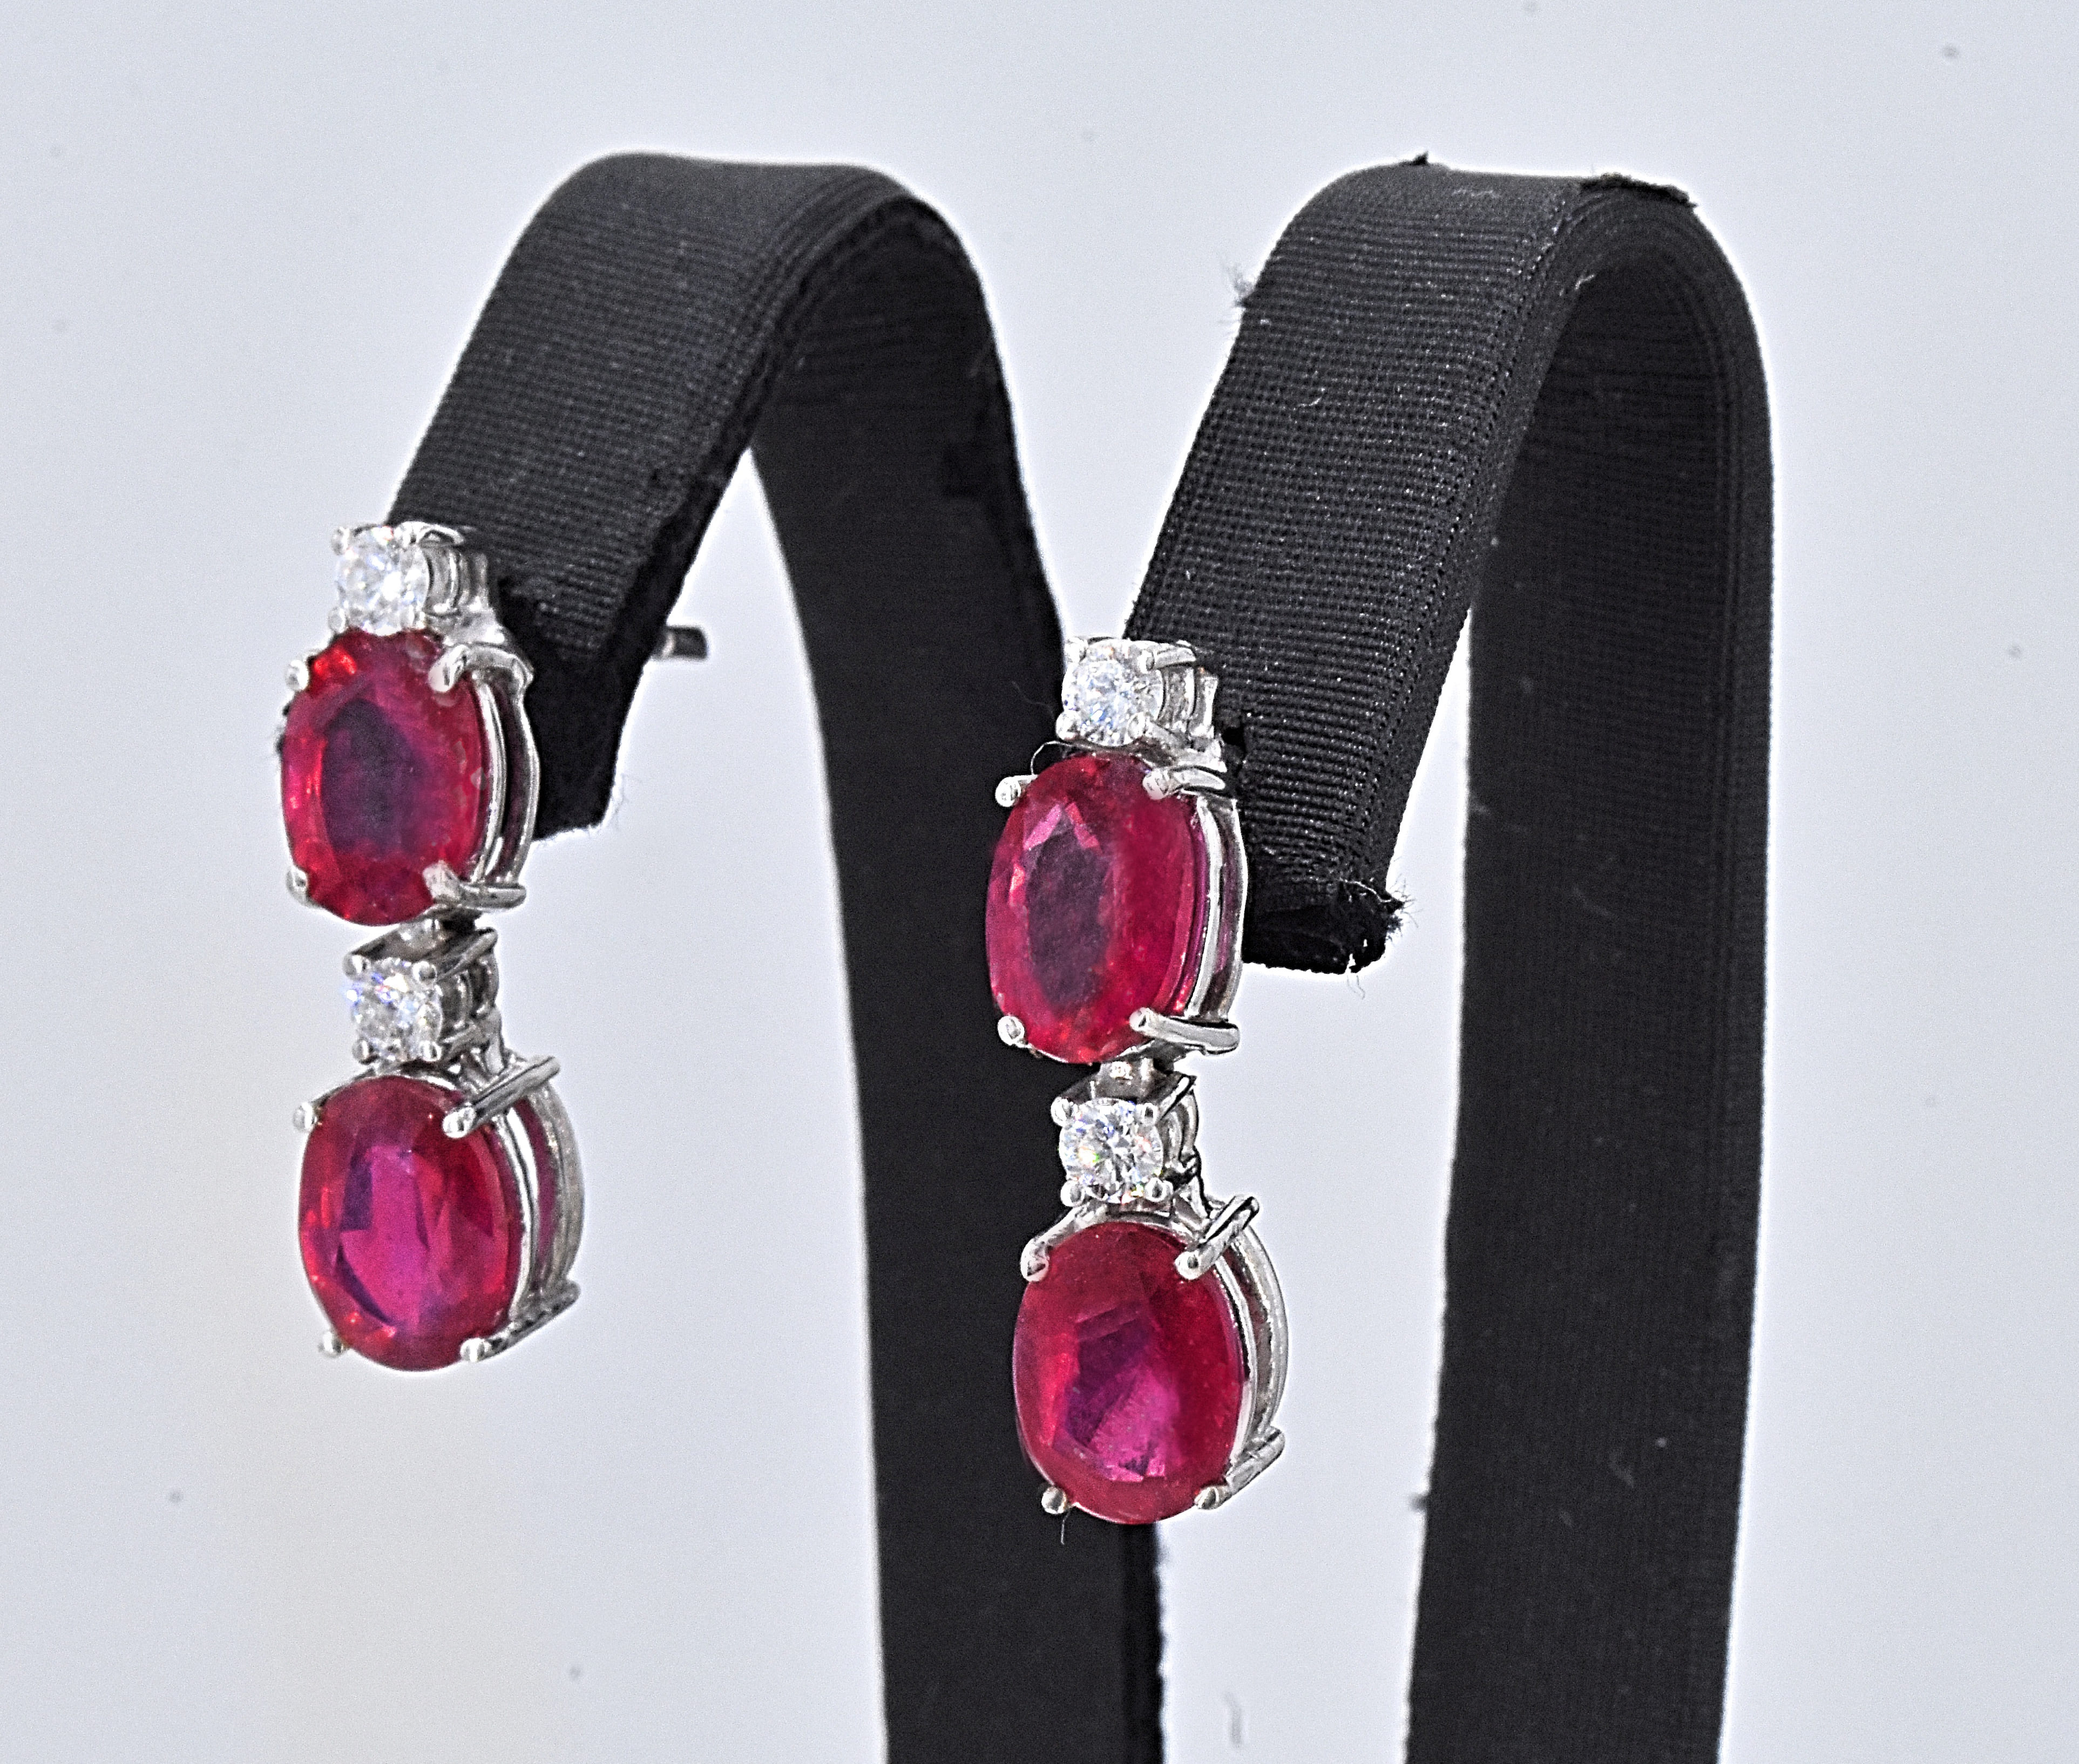 Earrings - 4.65 ct Ruby - Diamonds - NO RESERVE price! - Image 2 of 6